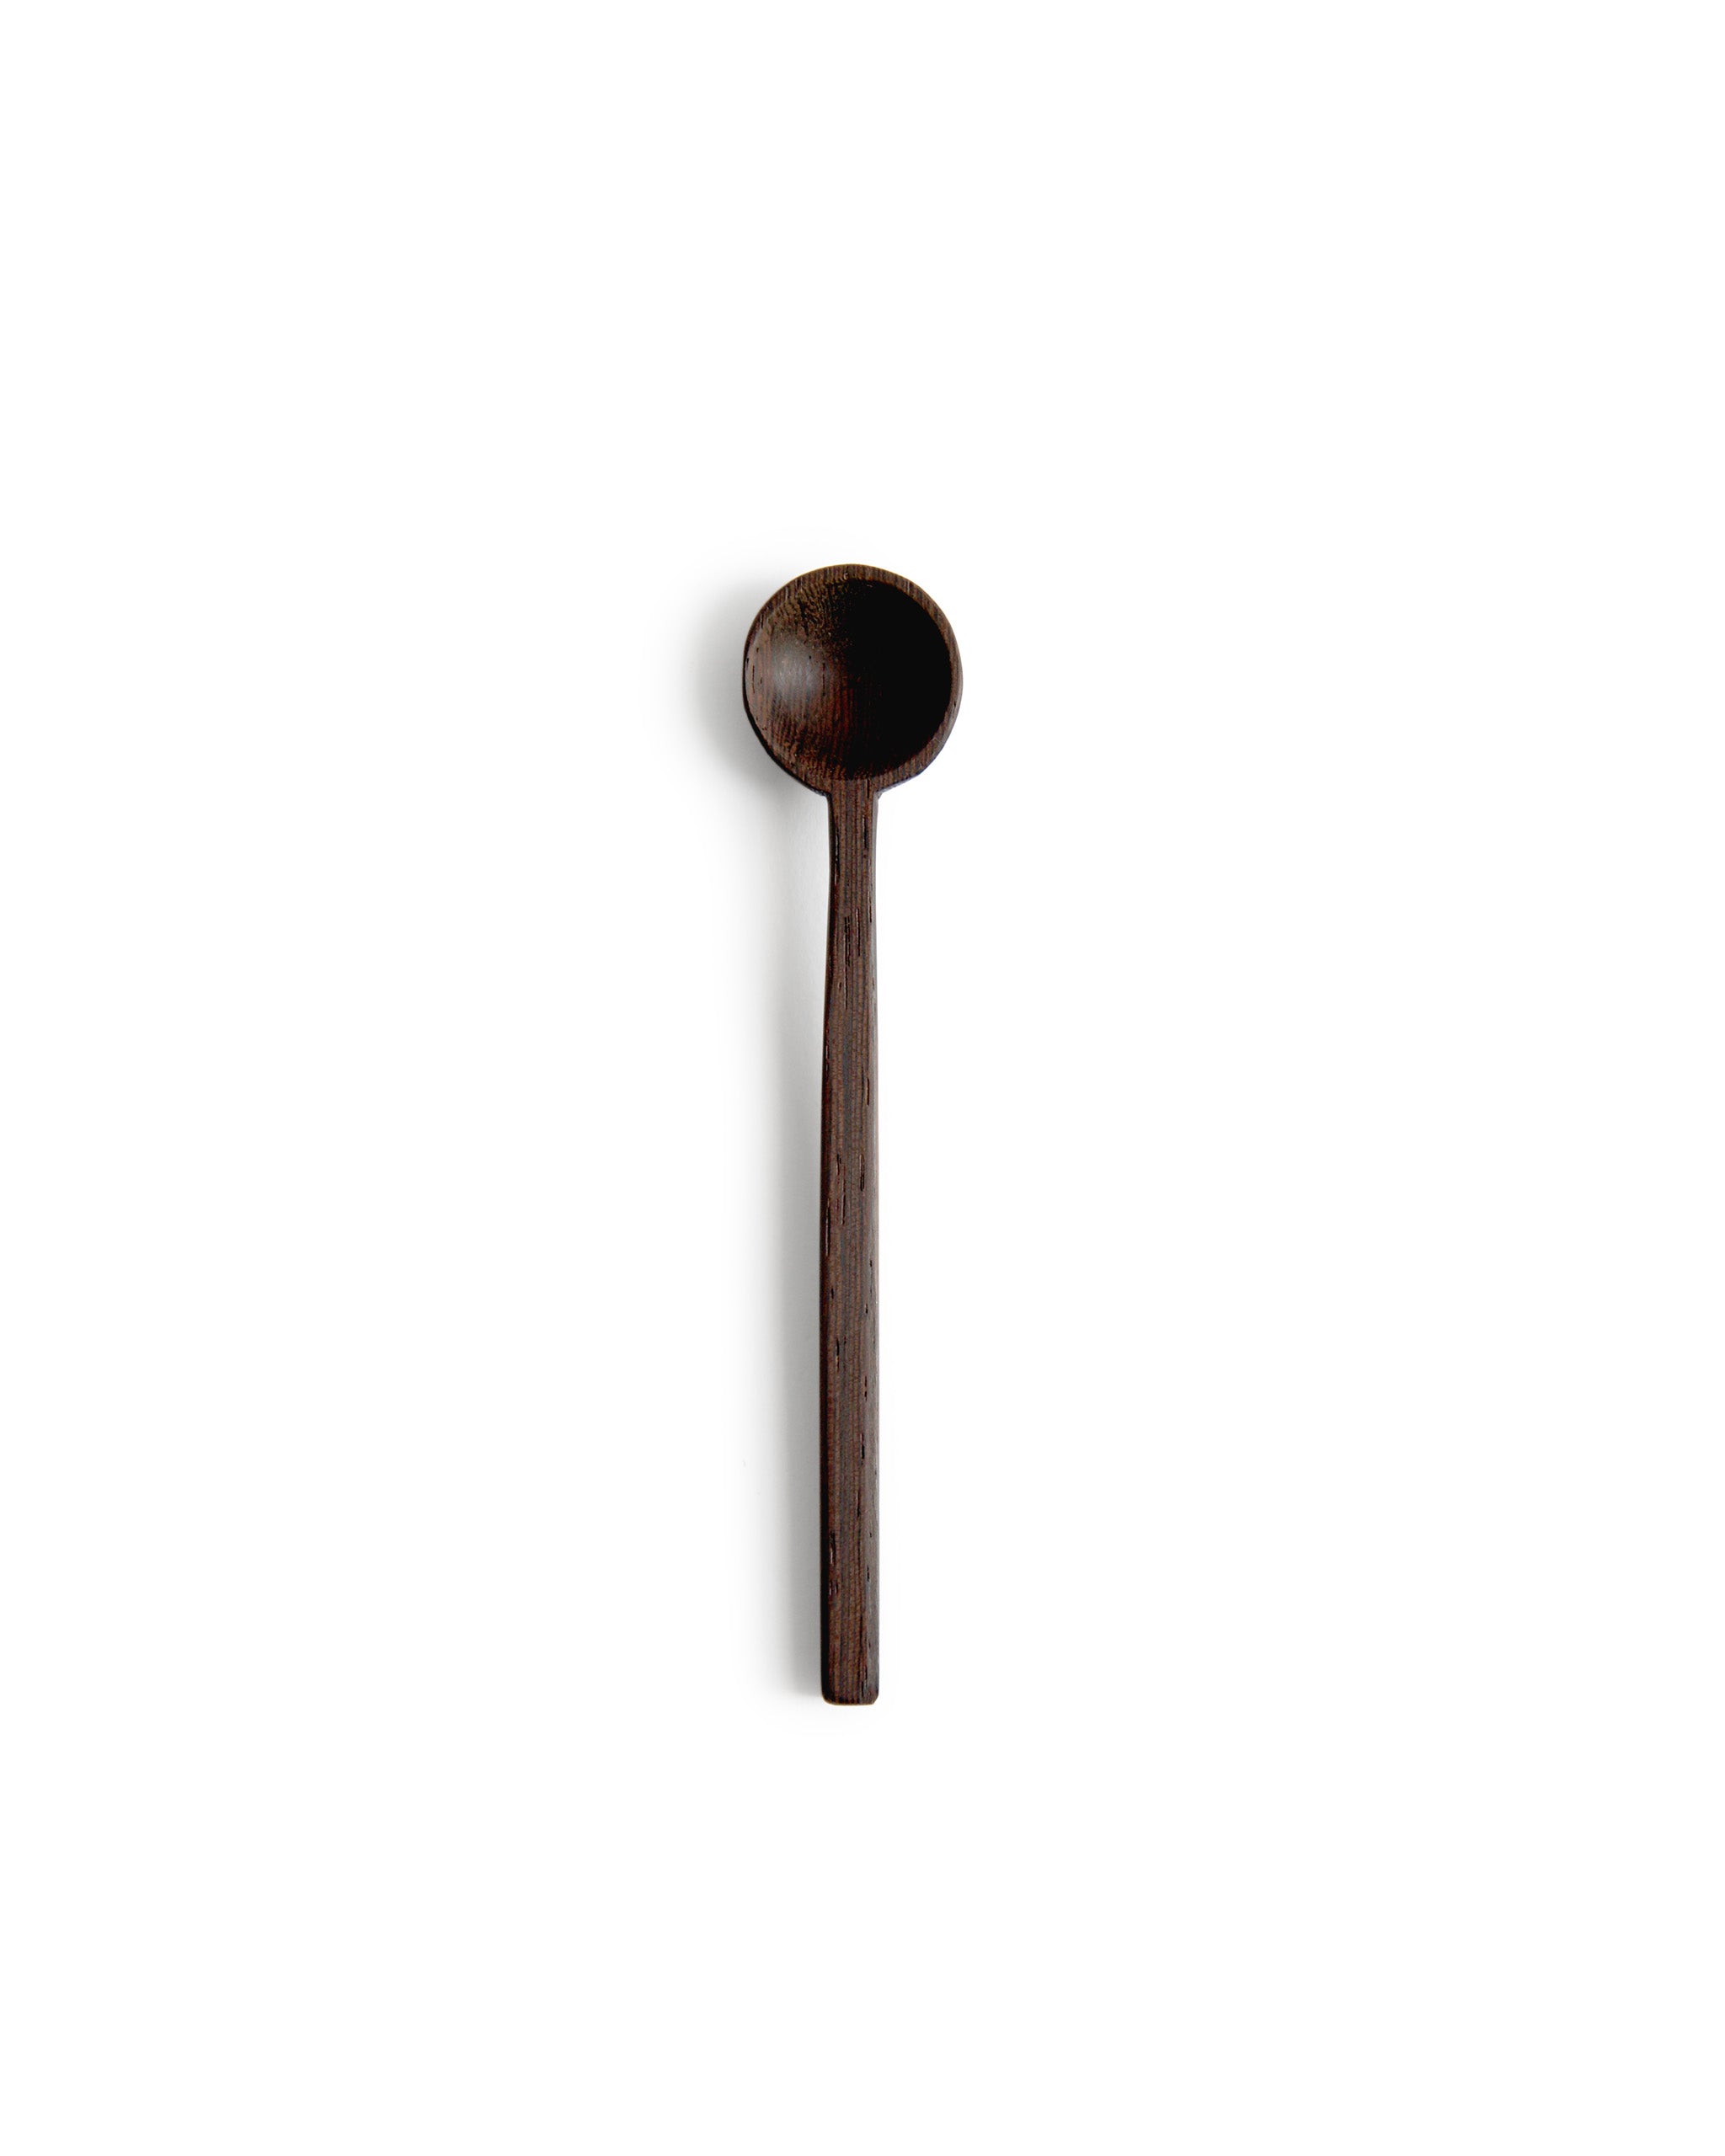 Silhouetted image of hand carved tagaya wood spoon by Nalata Nalata against white background.